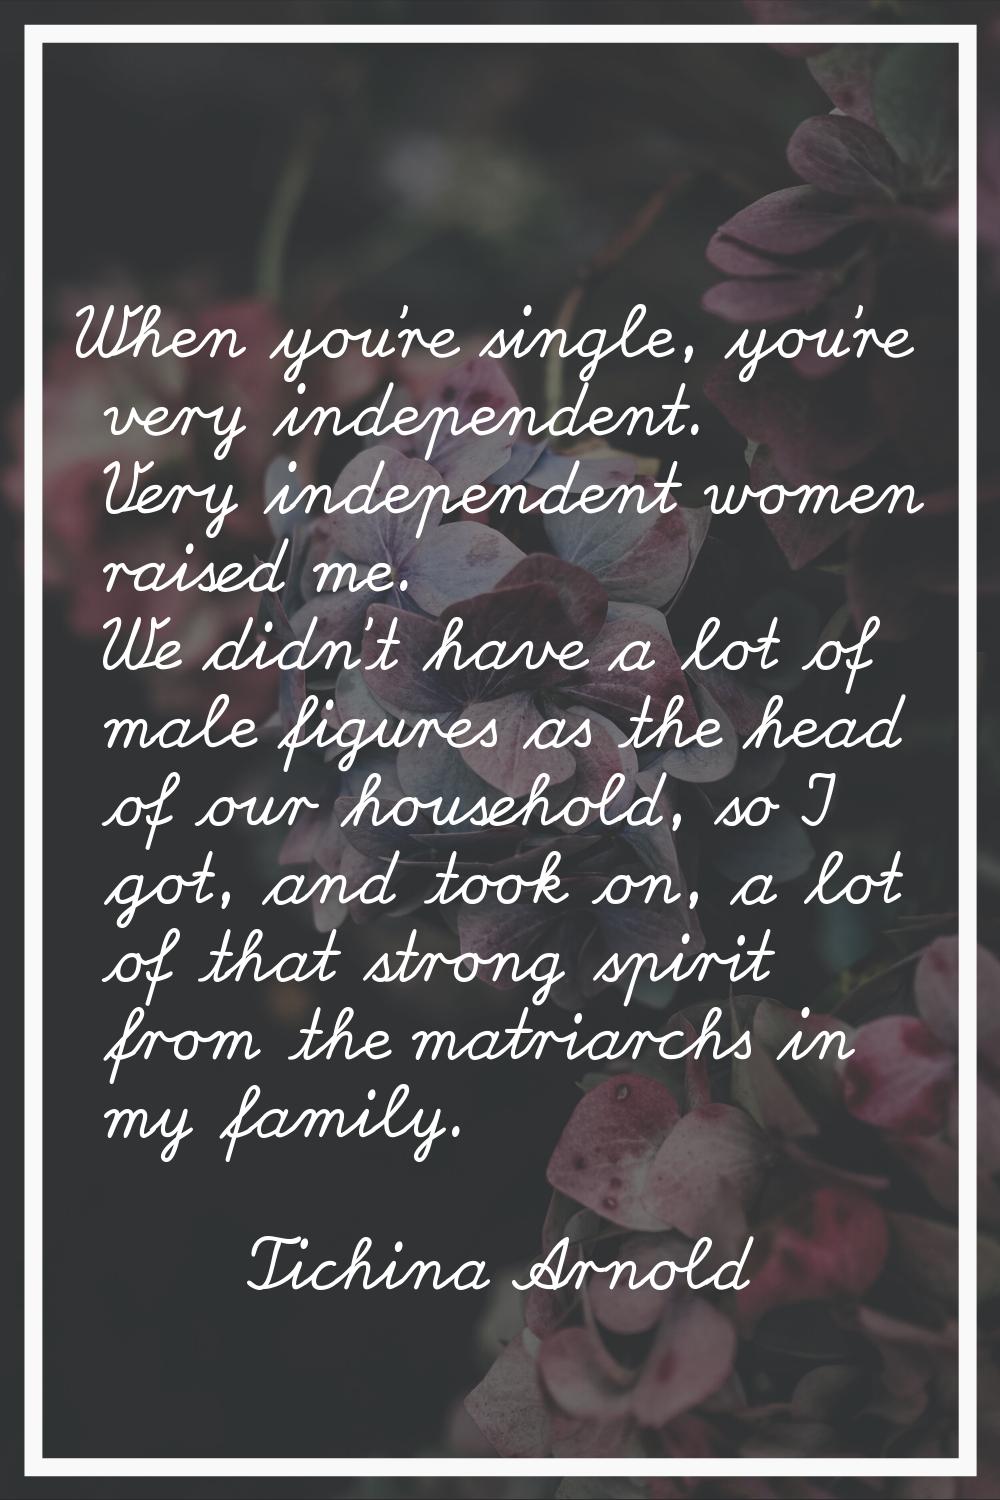 When you're single, you're very independent. Very independent women raised me. We didn't have a lot